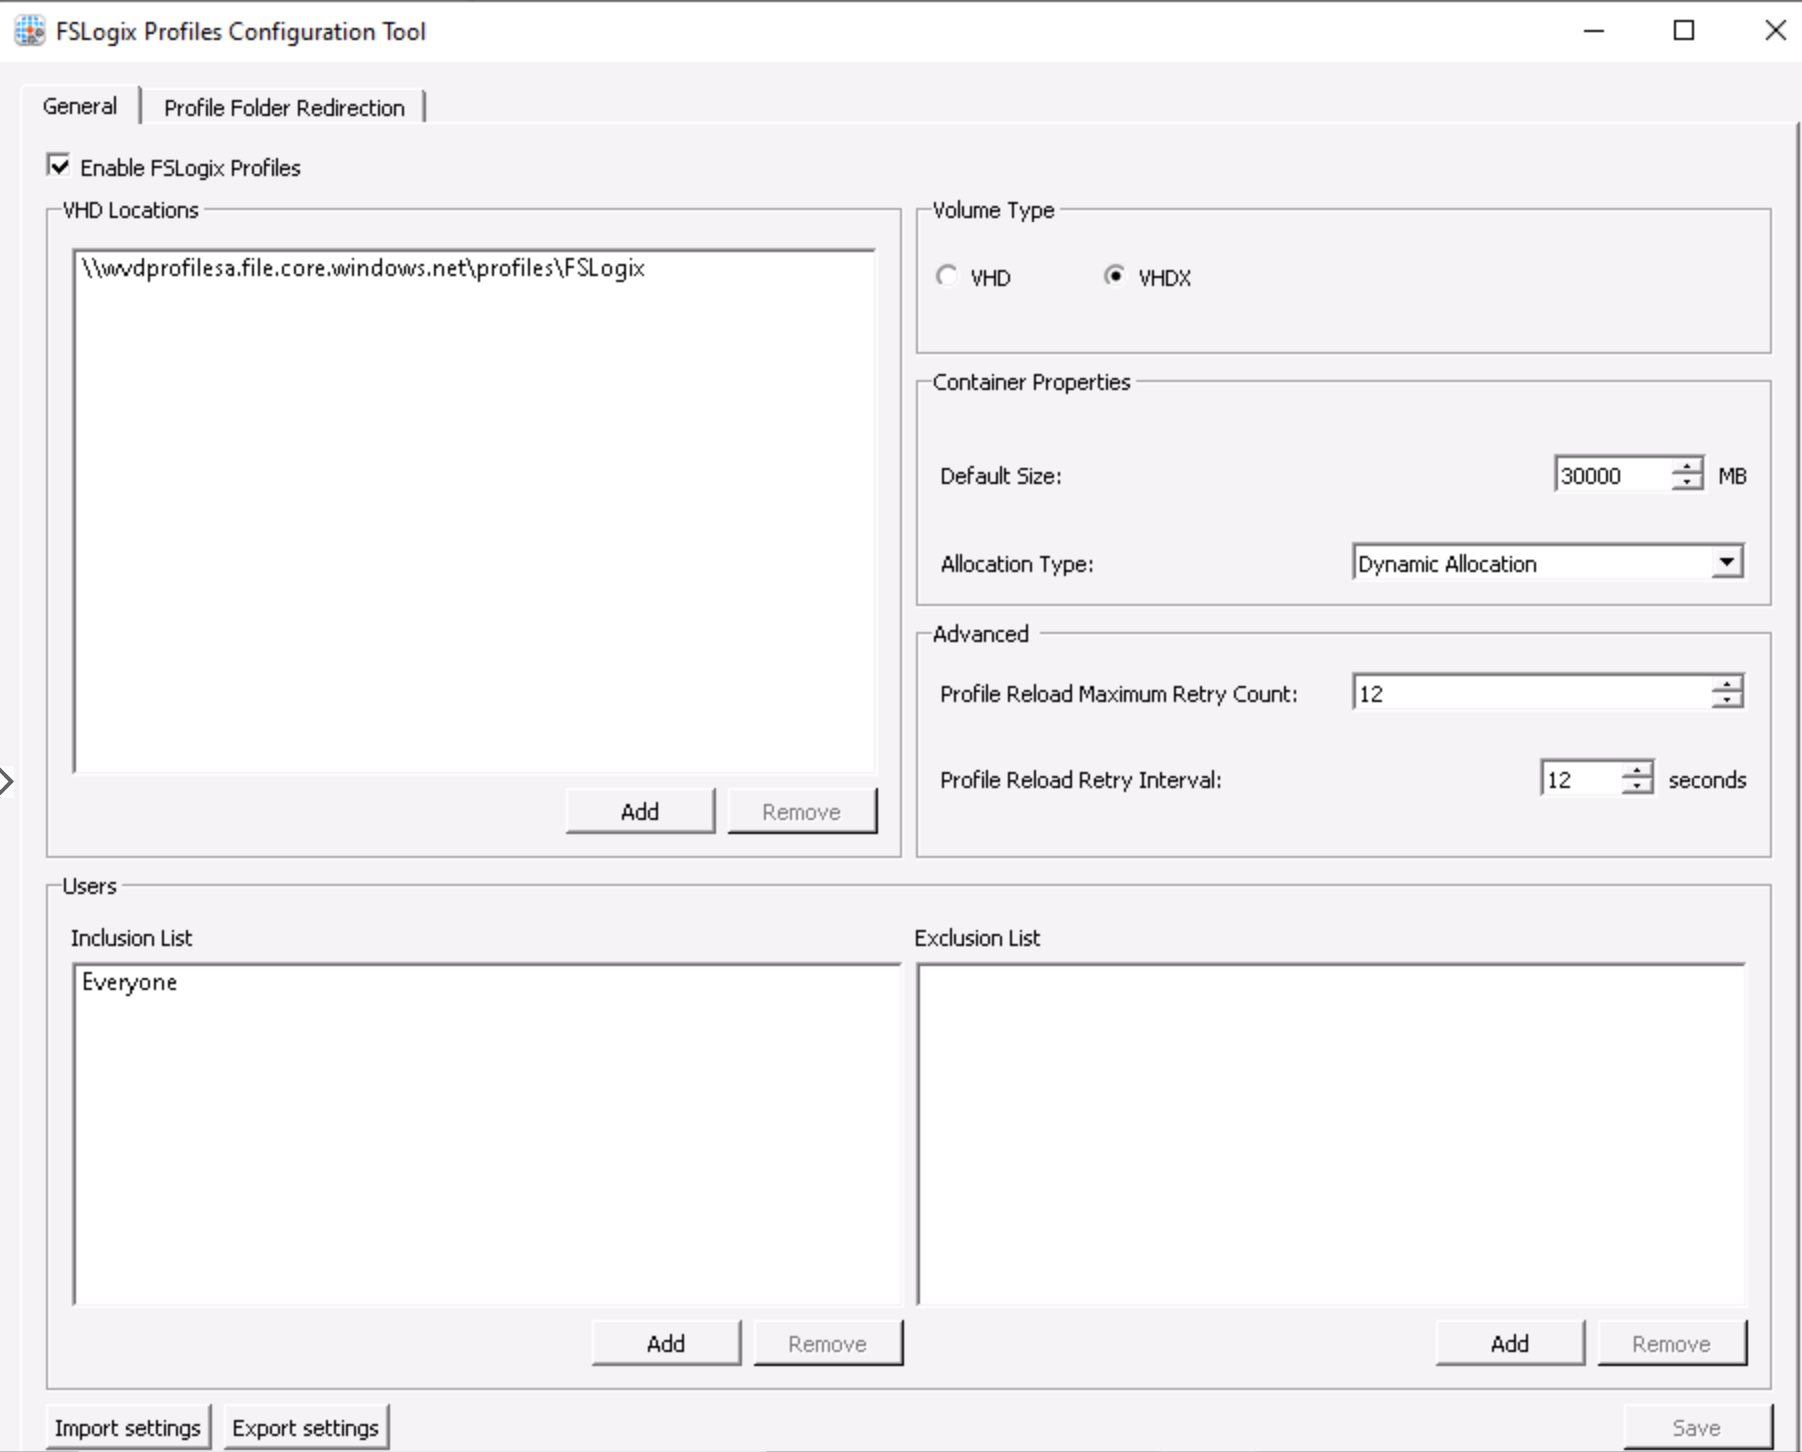 Enable FSLogix Profiles and specify the container location